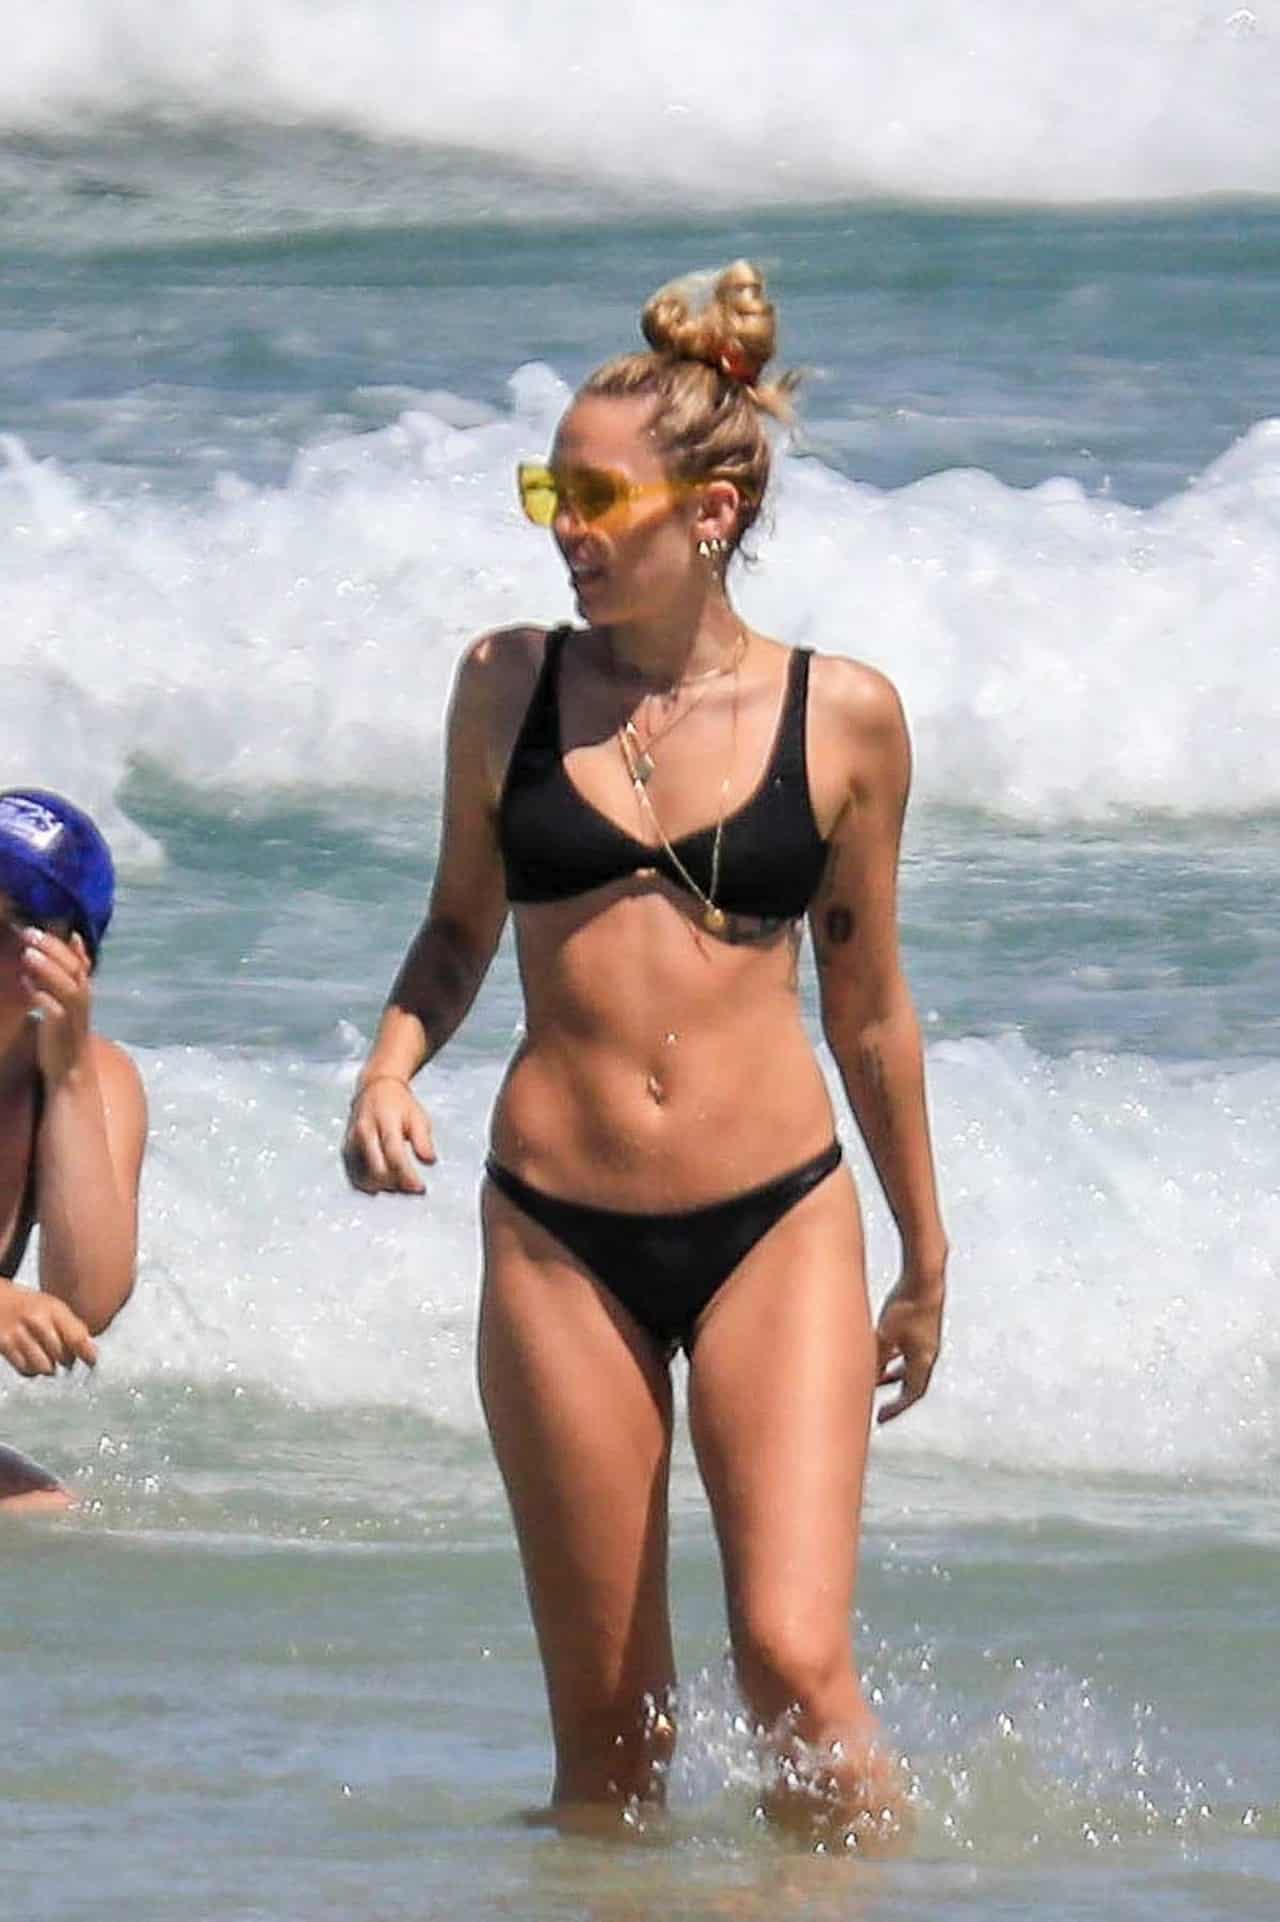 Miley Cyrus Flaunts Her Fit Physique in a Black Bikini at Byron Bay